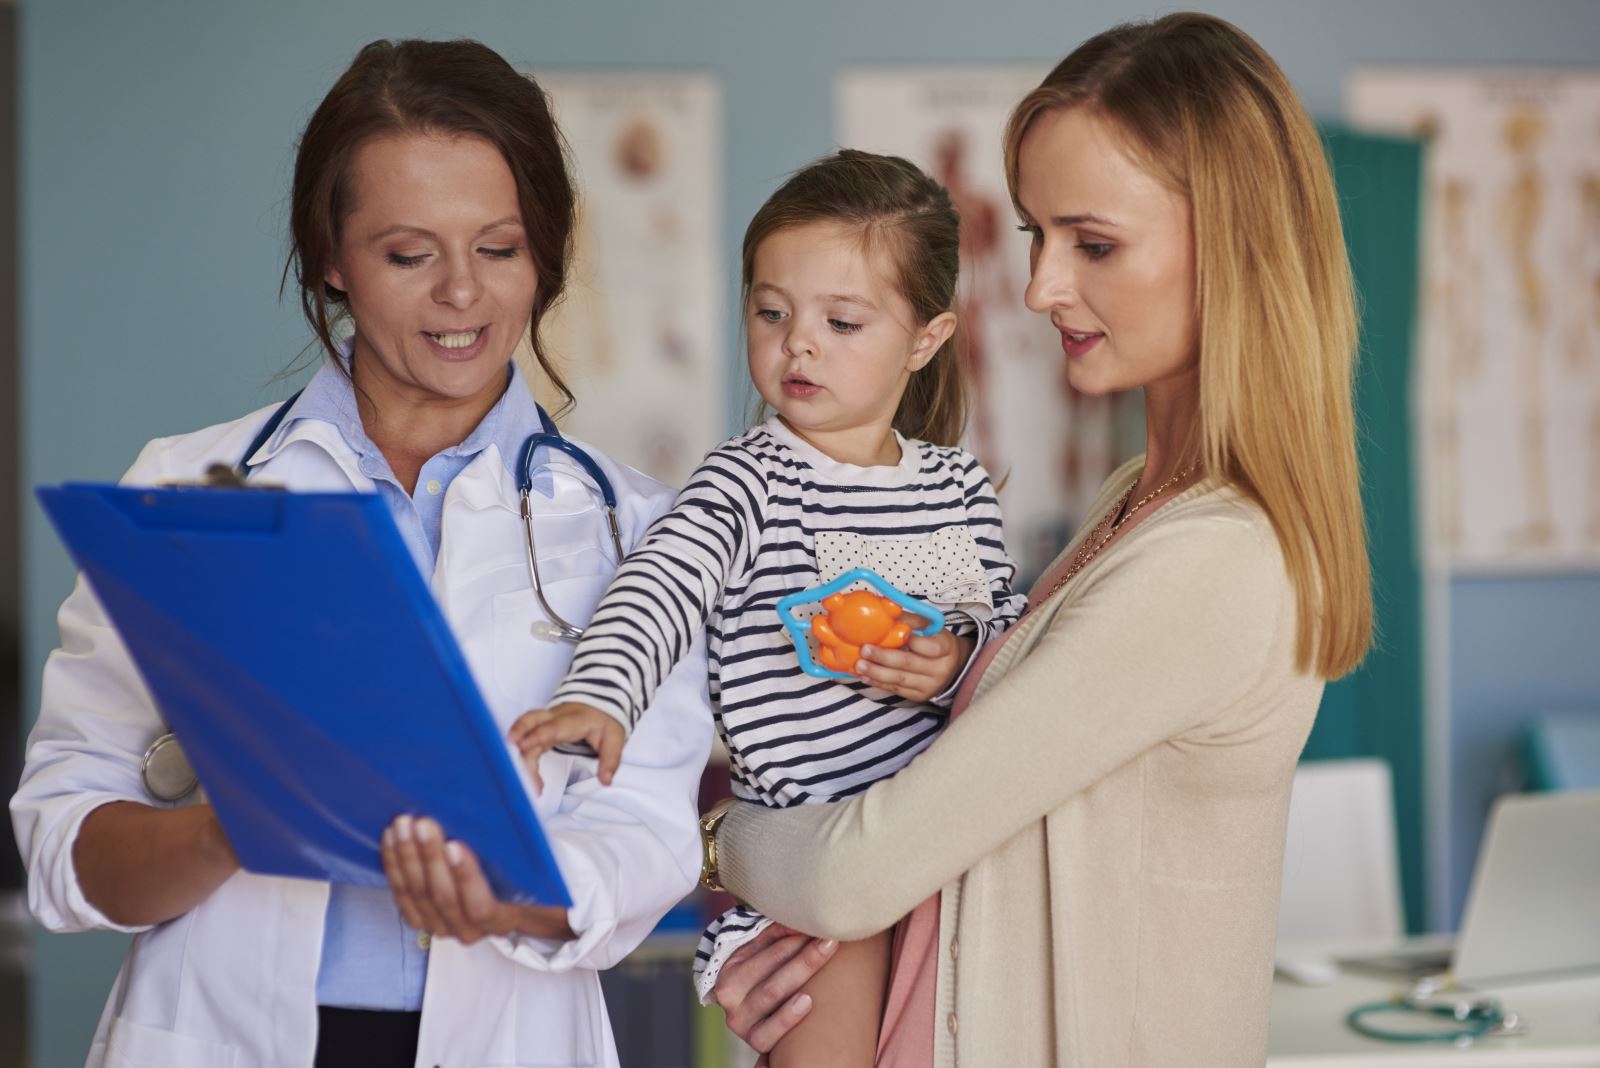 Image of a mother and child with a doctor looking at a chart image